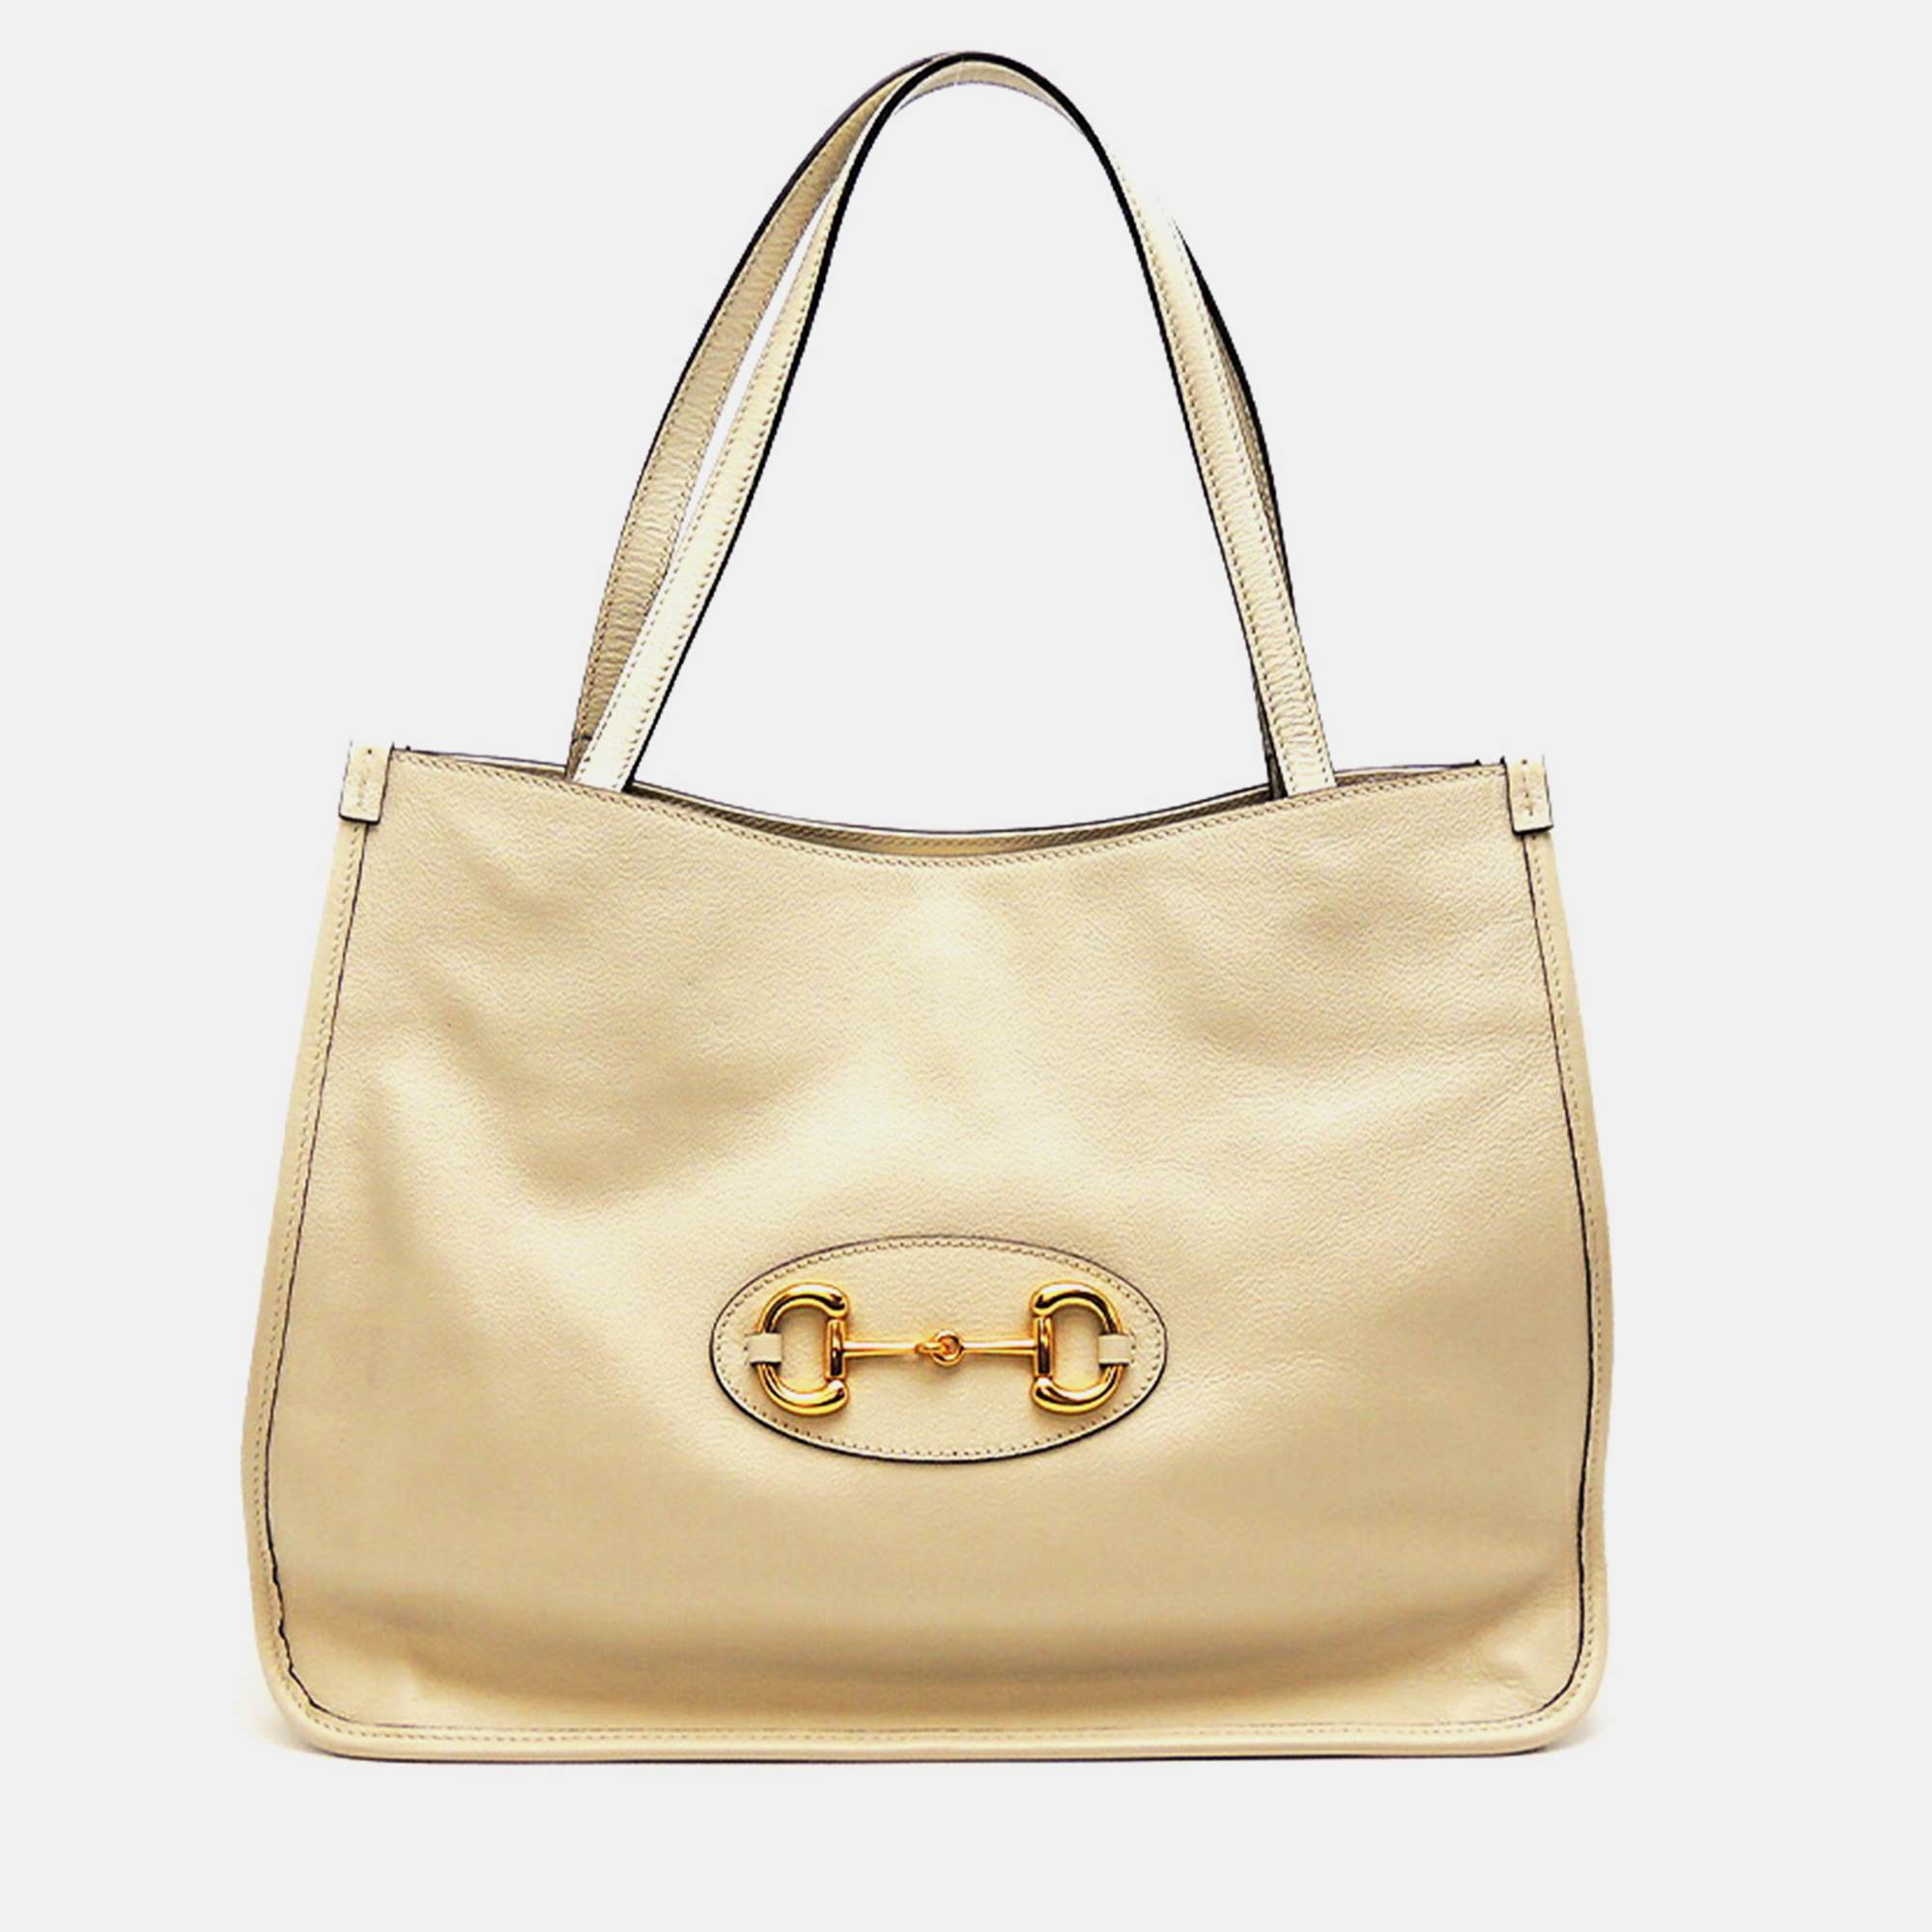 Elevate your every day with this Gucci tote. Meticulously designed it seamlessly blends functionality with luxury offering the perfect accessory to showcase your discerning style while effortlessly carrying your essentials.